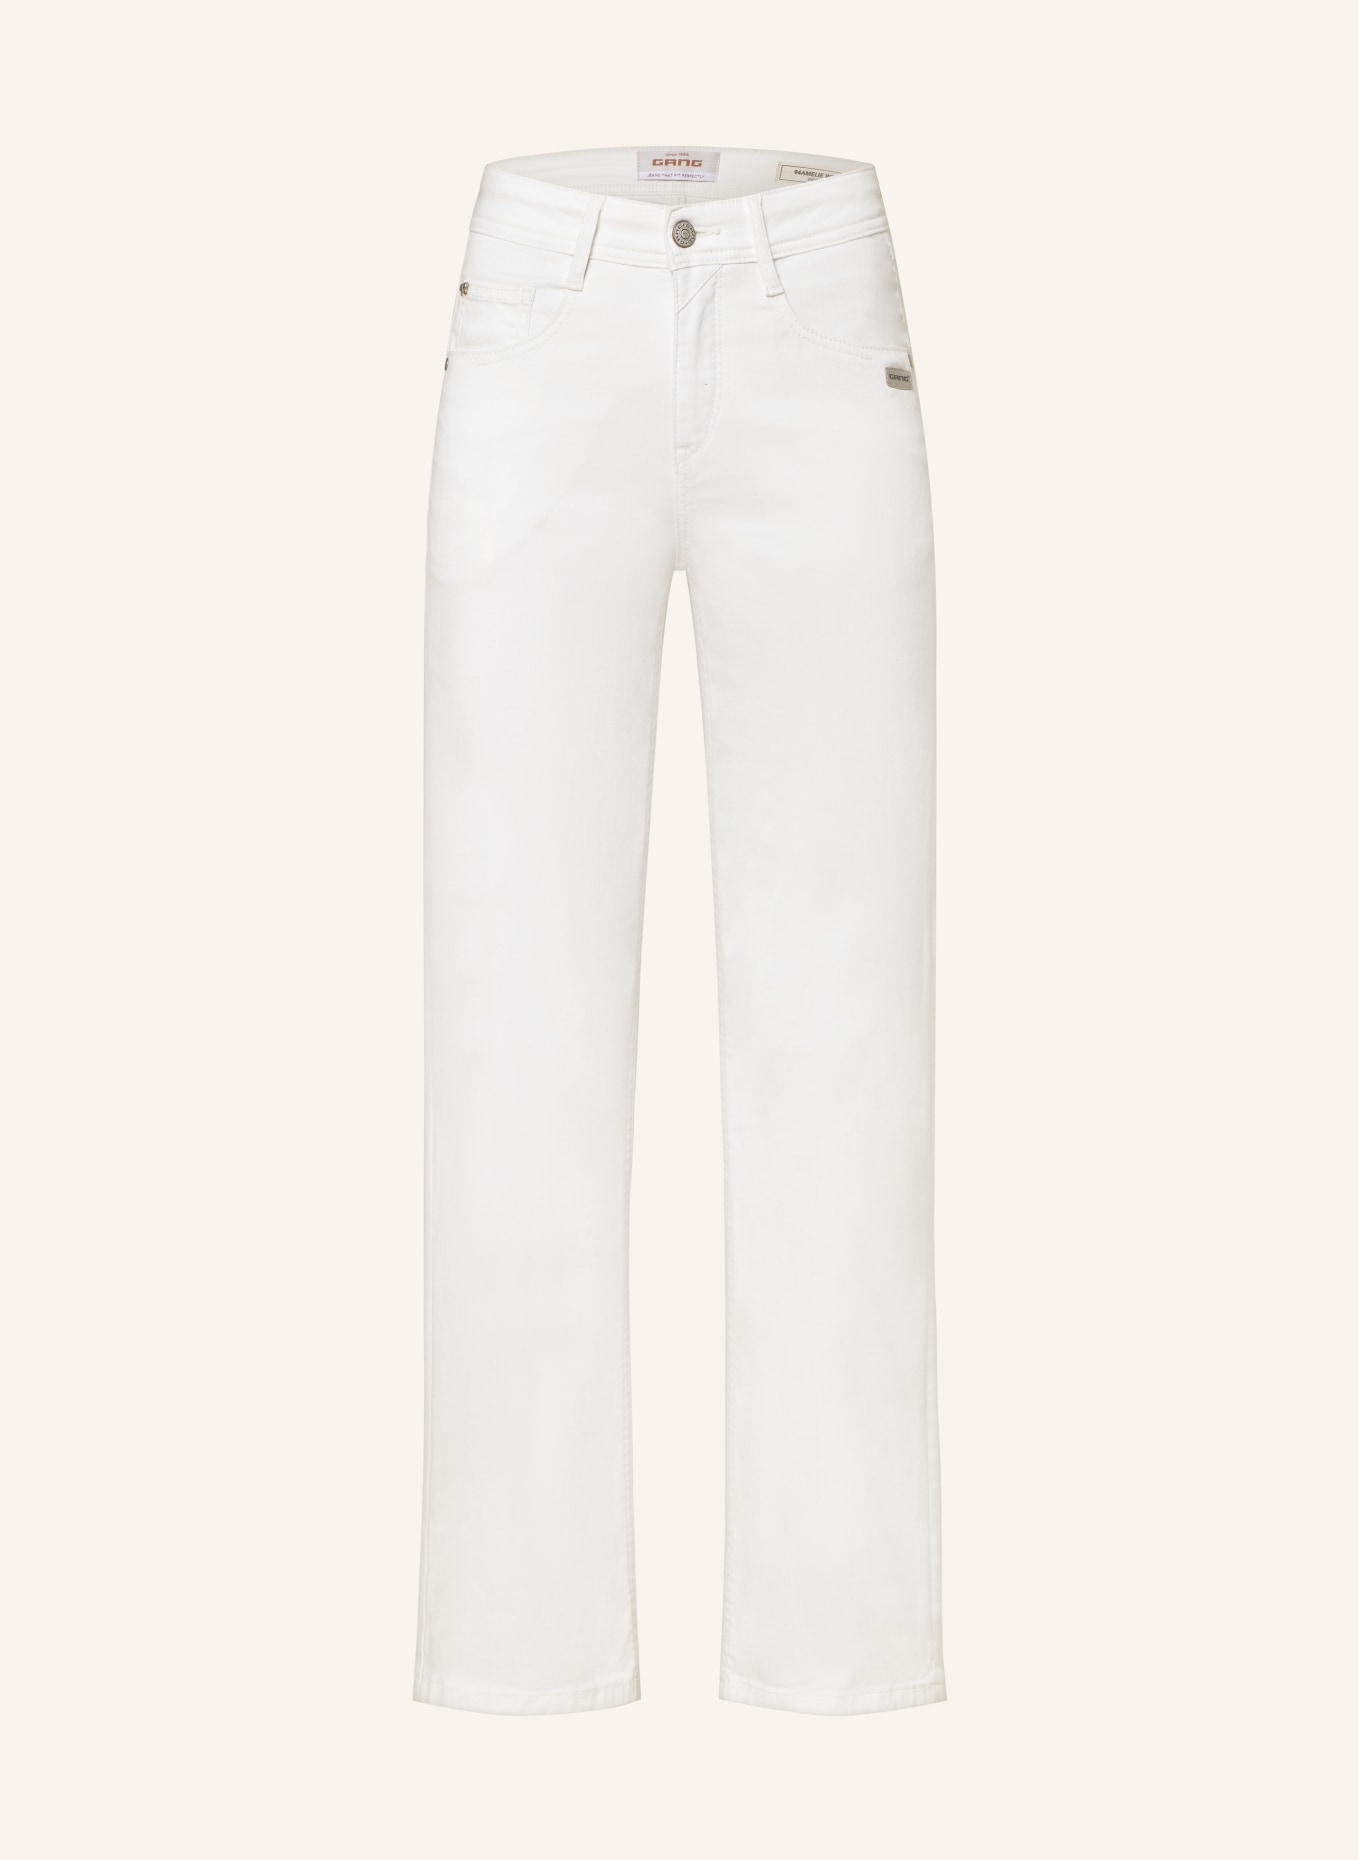 GANG Flared Jeans AMELIE, Farbe: 6007 off white (Bild 1)